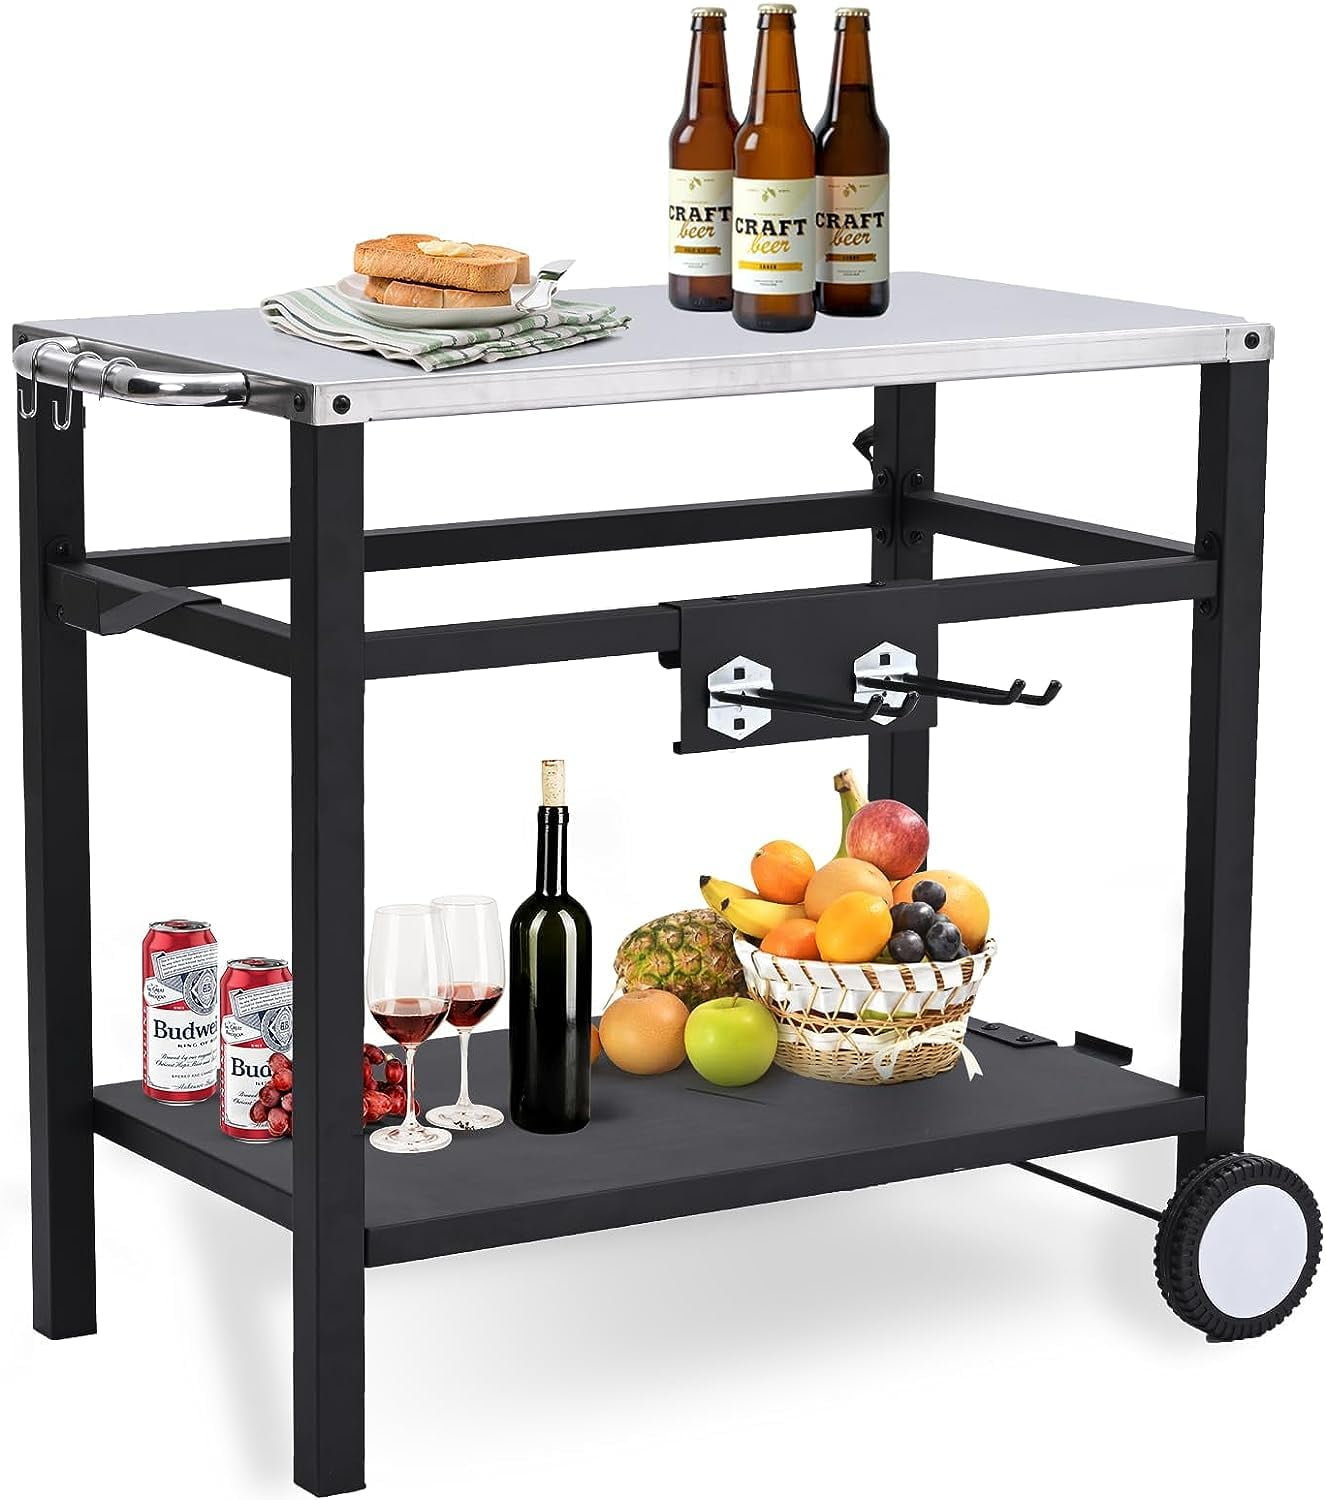 Ninja Black Aluminum Folding Grill Stand in the Grill Carts & Grill Stands  department at